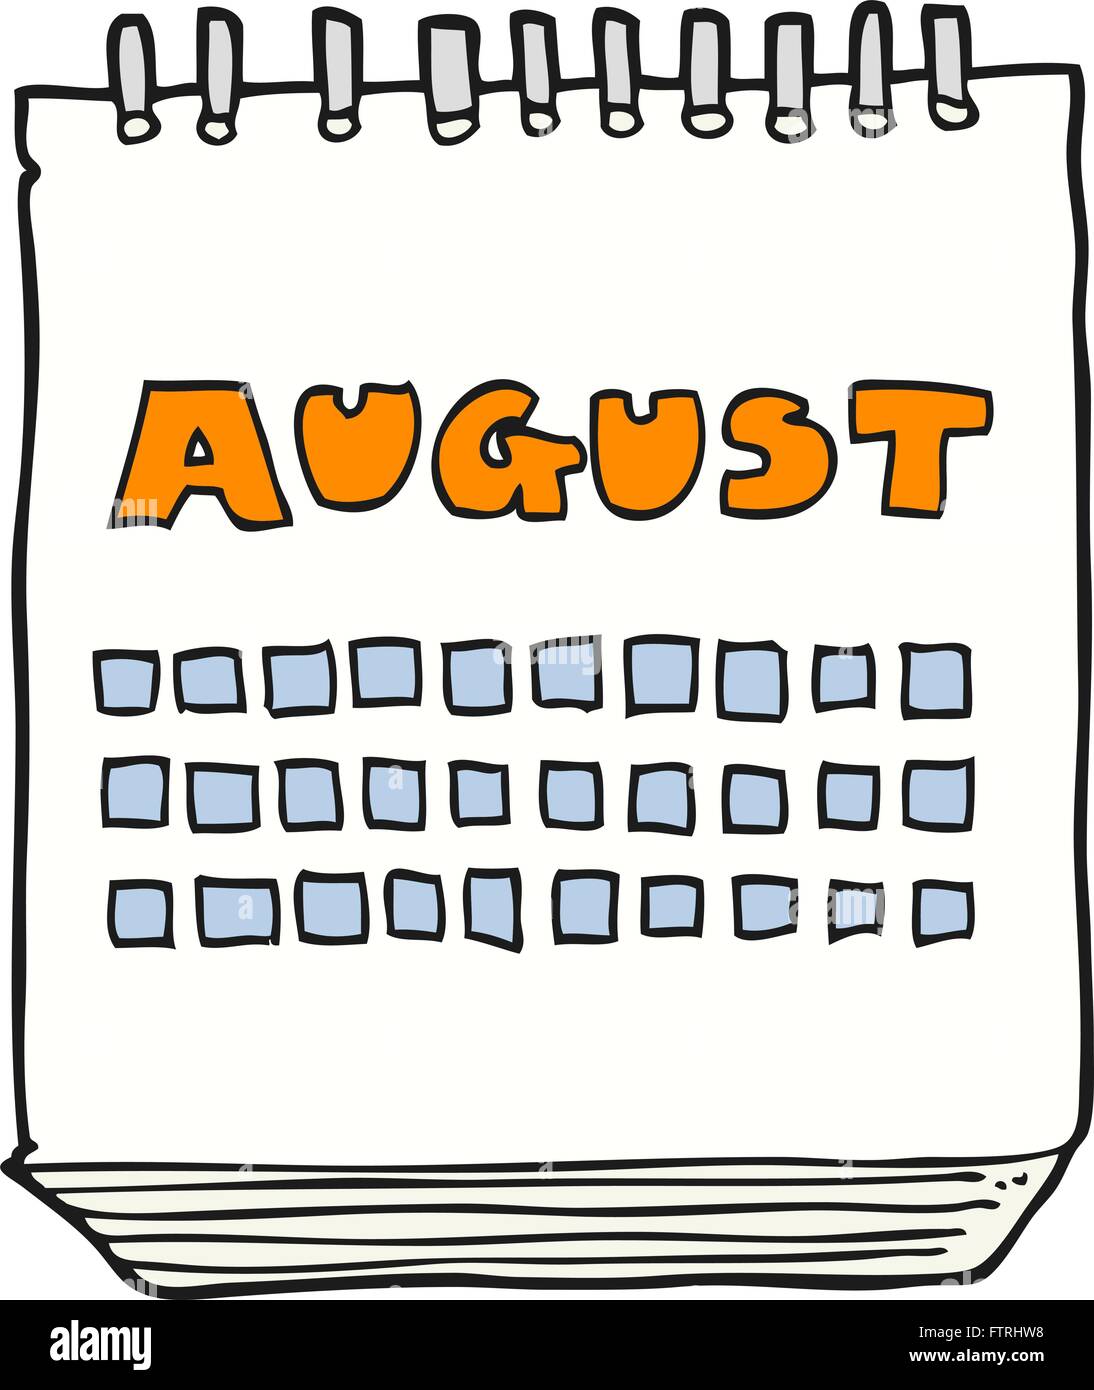 freehand drawn cartoon calendar showing month of august Stock Vector